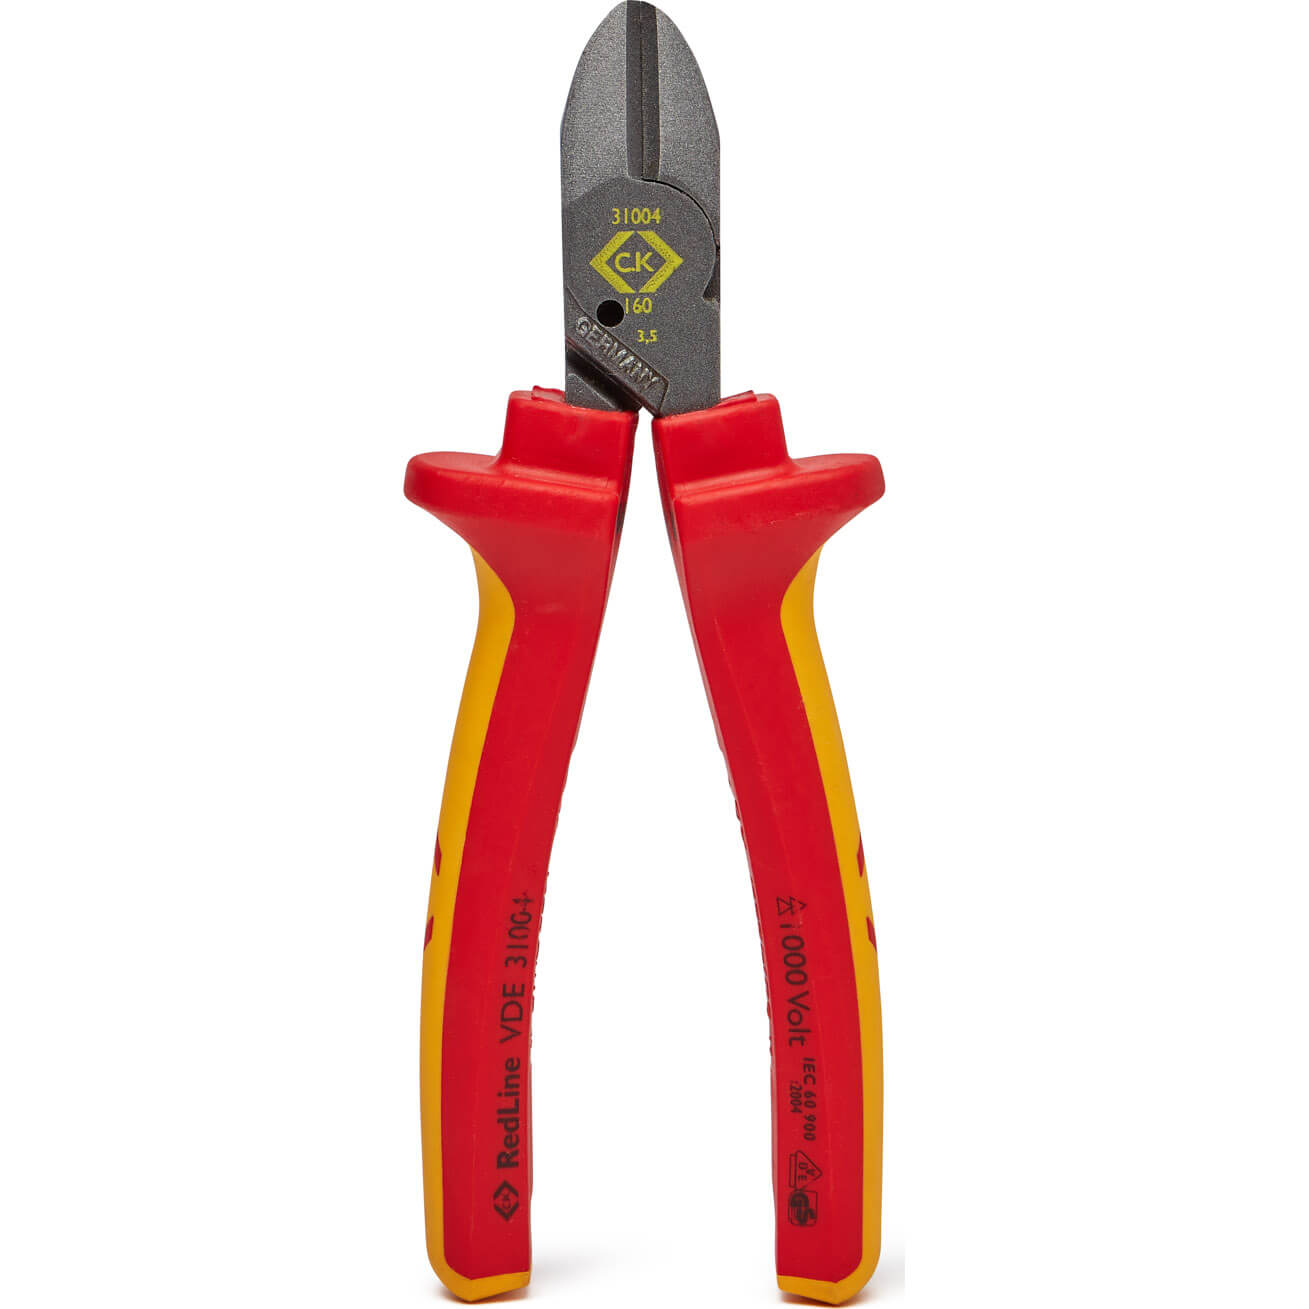 Photos - Utility Knife CK Tools CK RedLine CombiCutter VDE Insulated Electricians Pliers 160mm 431004 